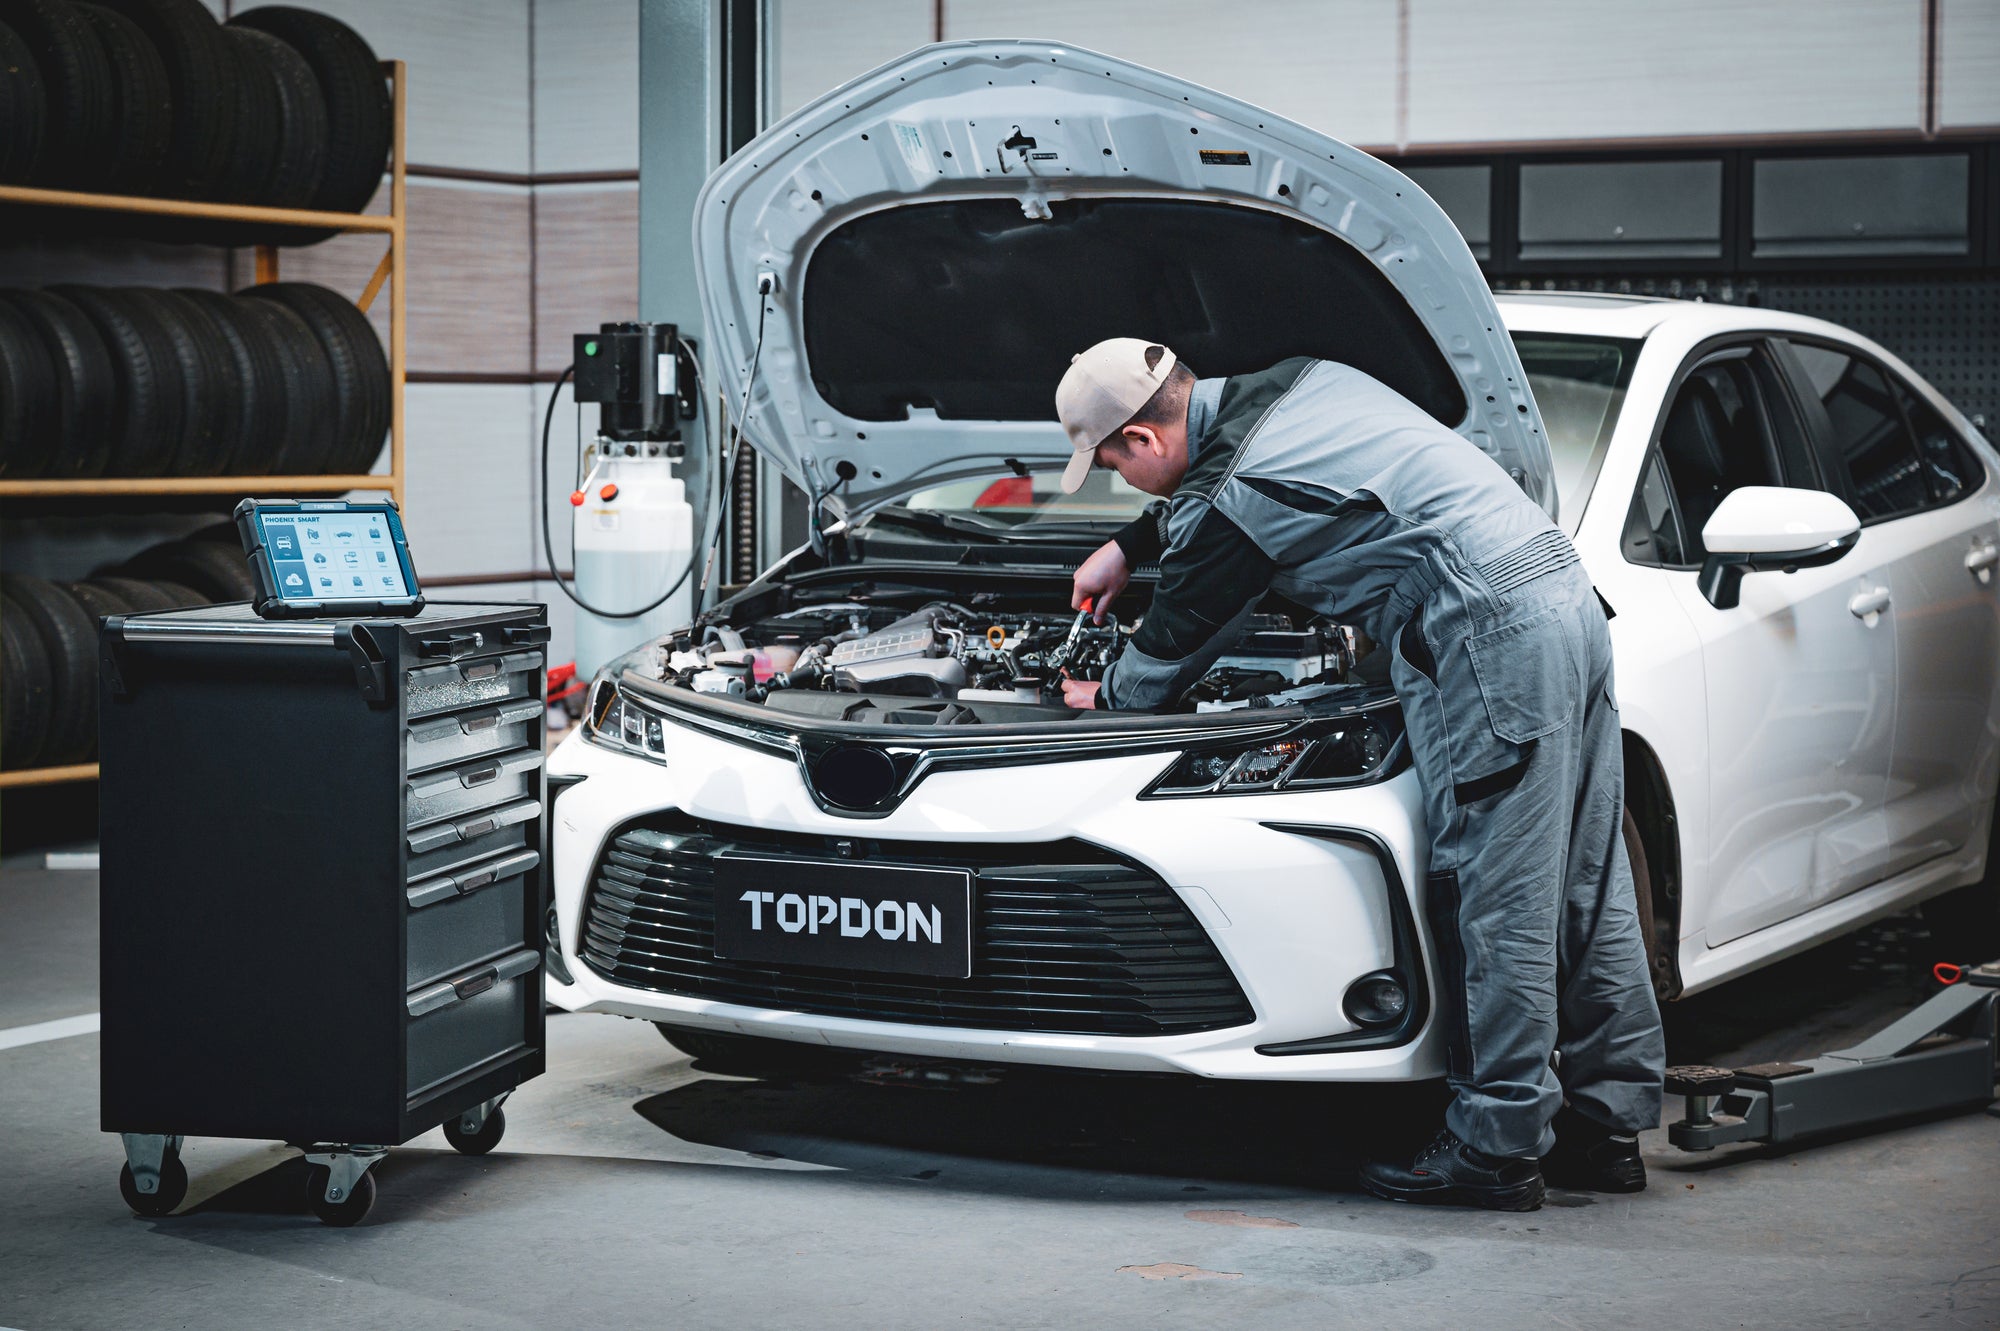 TOPDON USA Makes $25,000 Donation to TechForce Foundation in Support of Education and Career Opportunities for Auto Techs